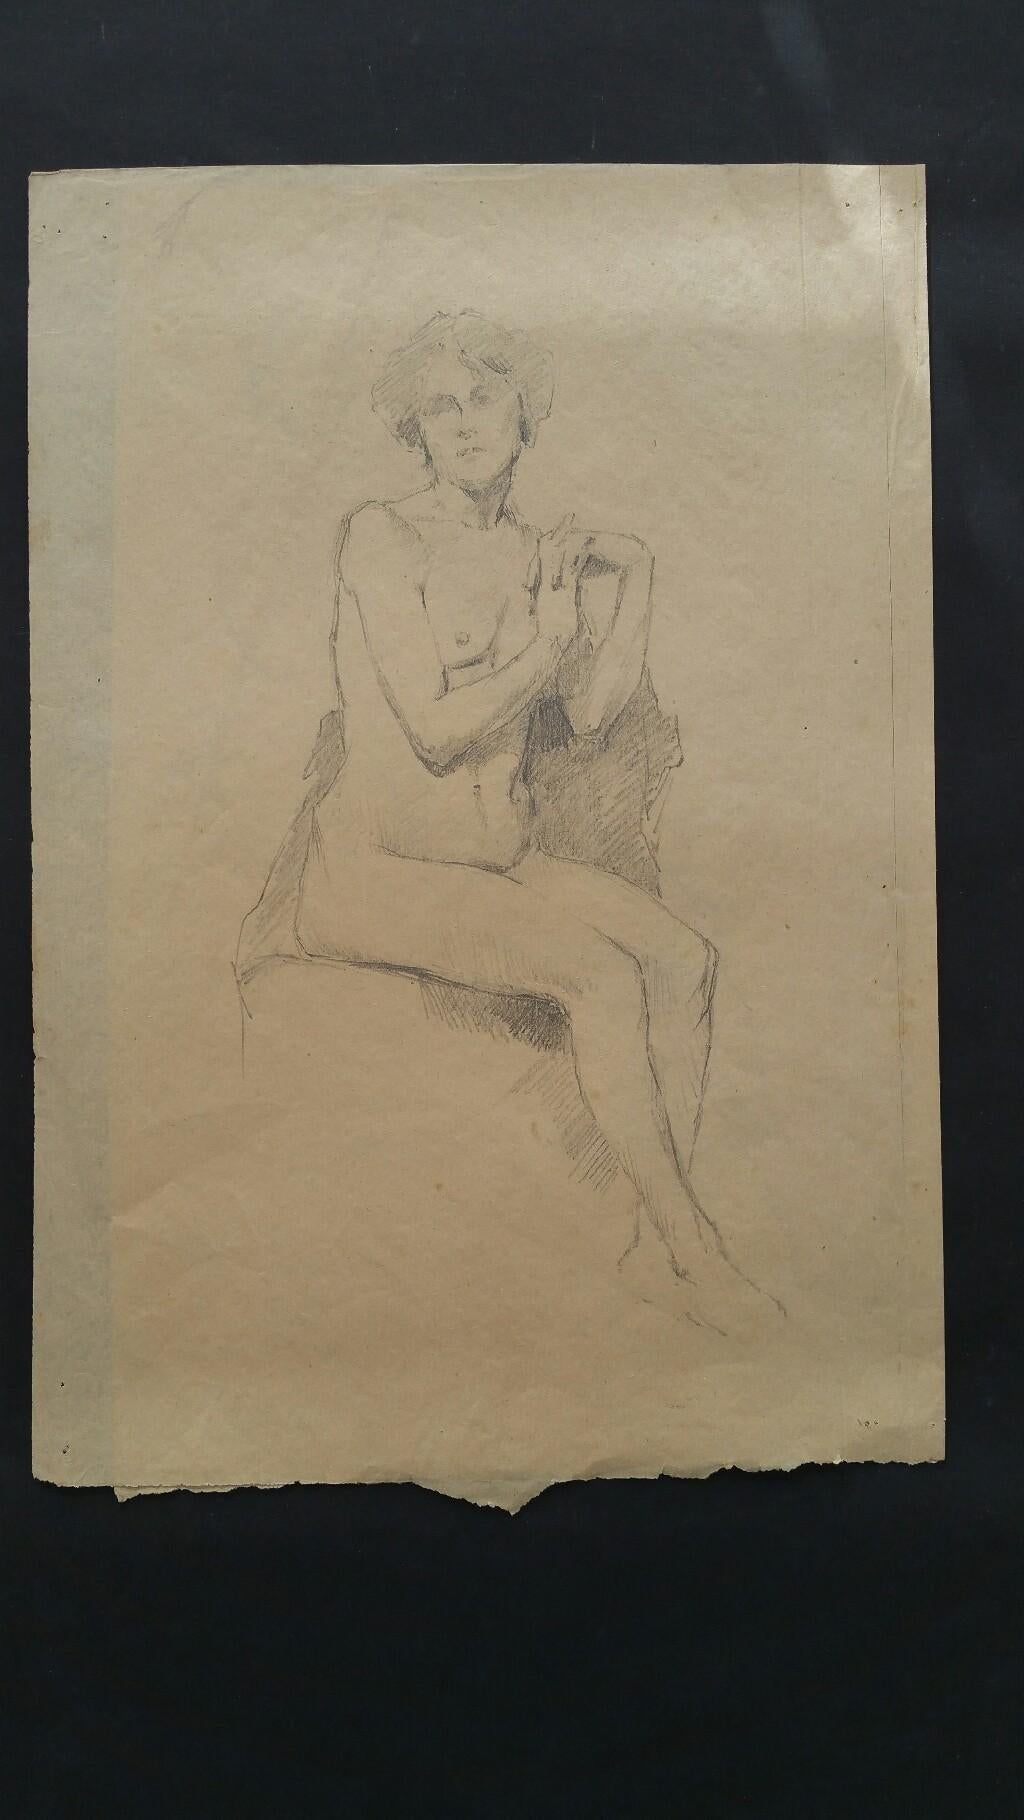 English Graphite Sketch of a Female Nude, Seated (with additional image attached) 
by Henry George Moon (British 1857-1905)
on yellowed thin artists paper, unframed
measurements: sheet 14.75 x 10 inches 

provenance: from the artists